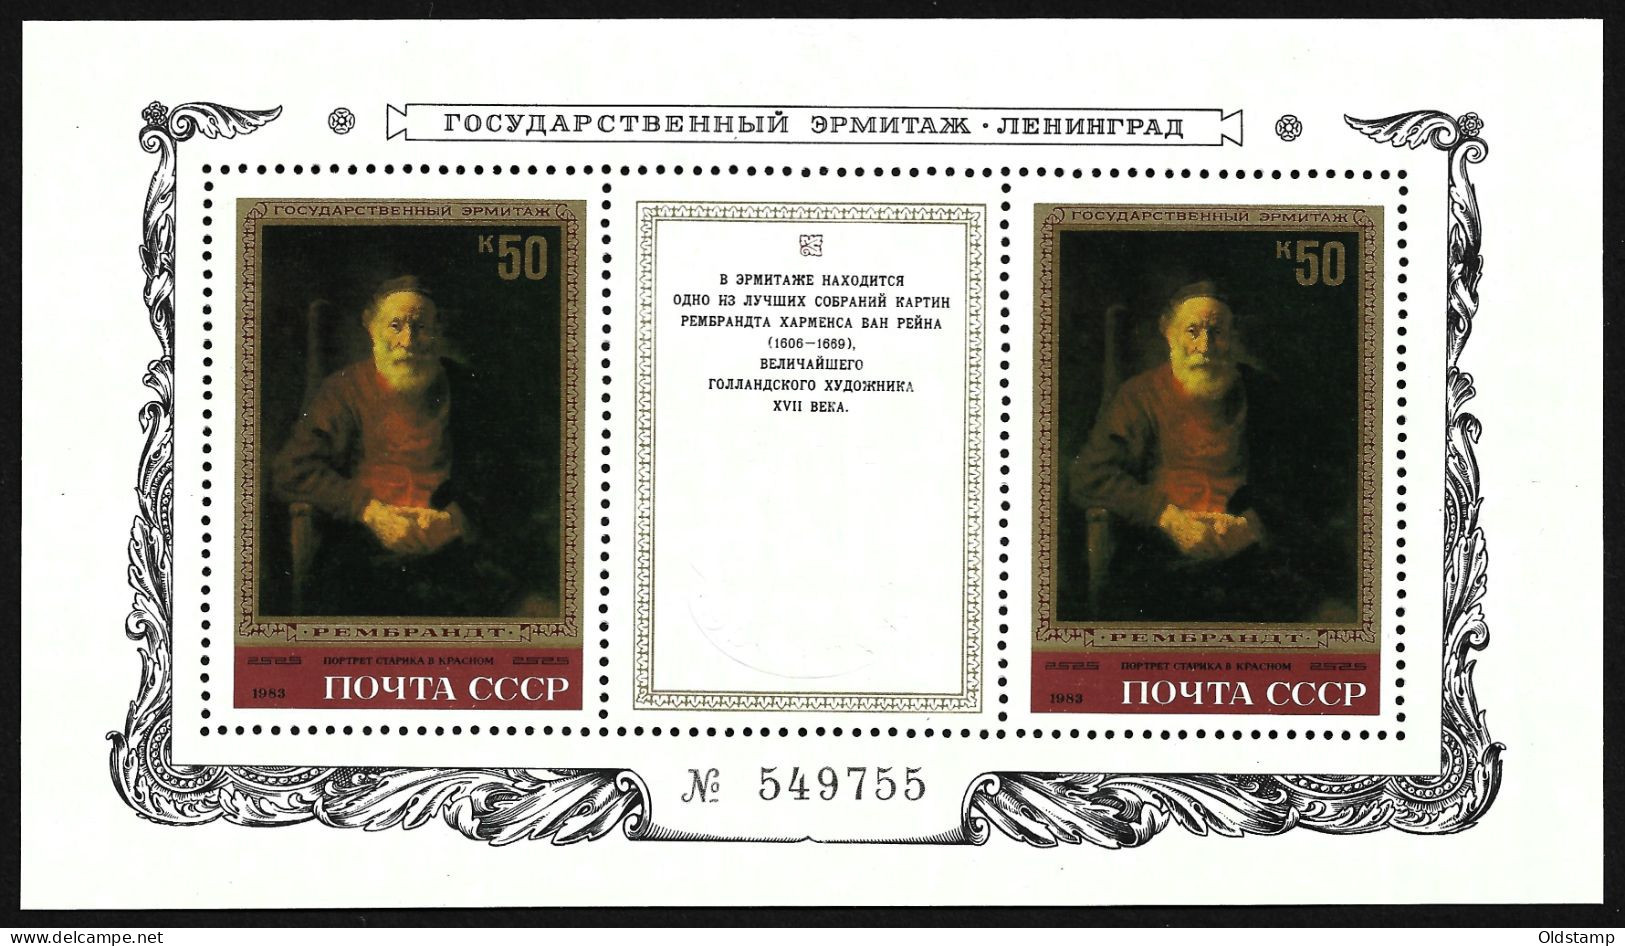 PAINTING USSR 1983 Soviet Union Art Rembrandt "Portrait Of An Old Man In Red" Museum Leningrad Hermitage MNH Stamp Block - Rembrandt